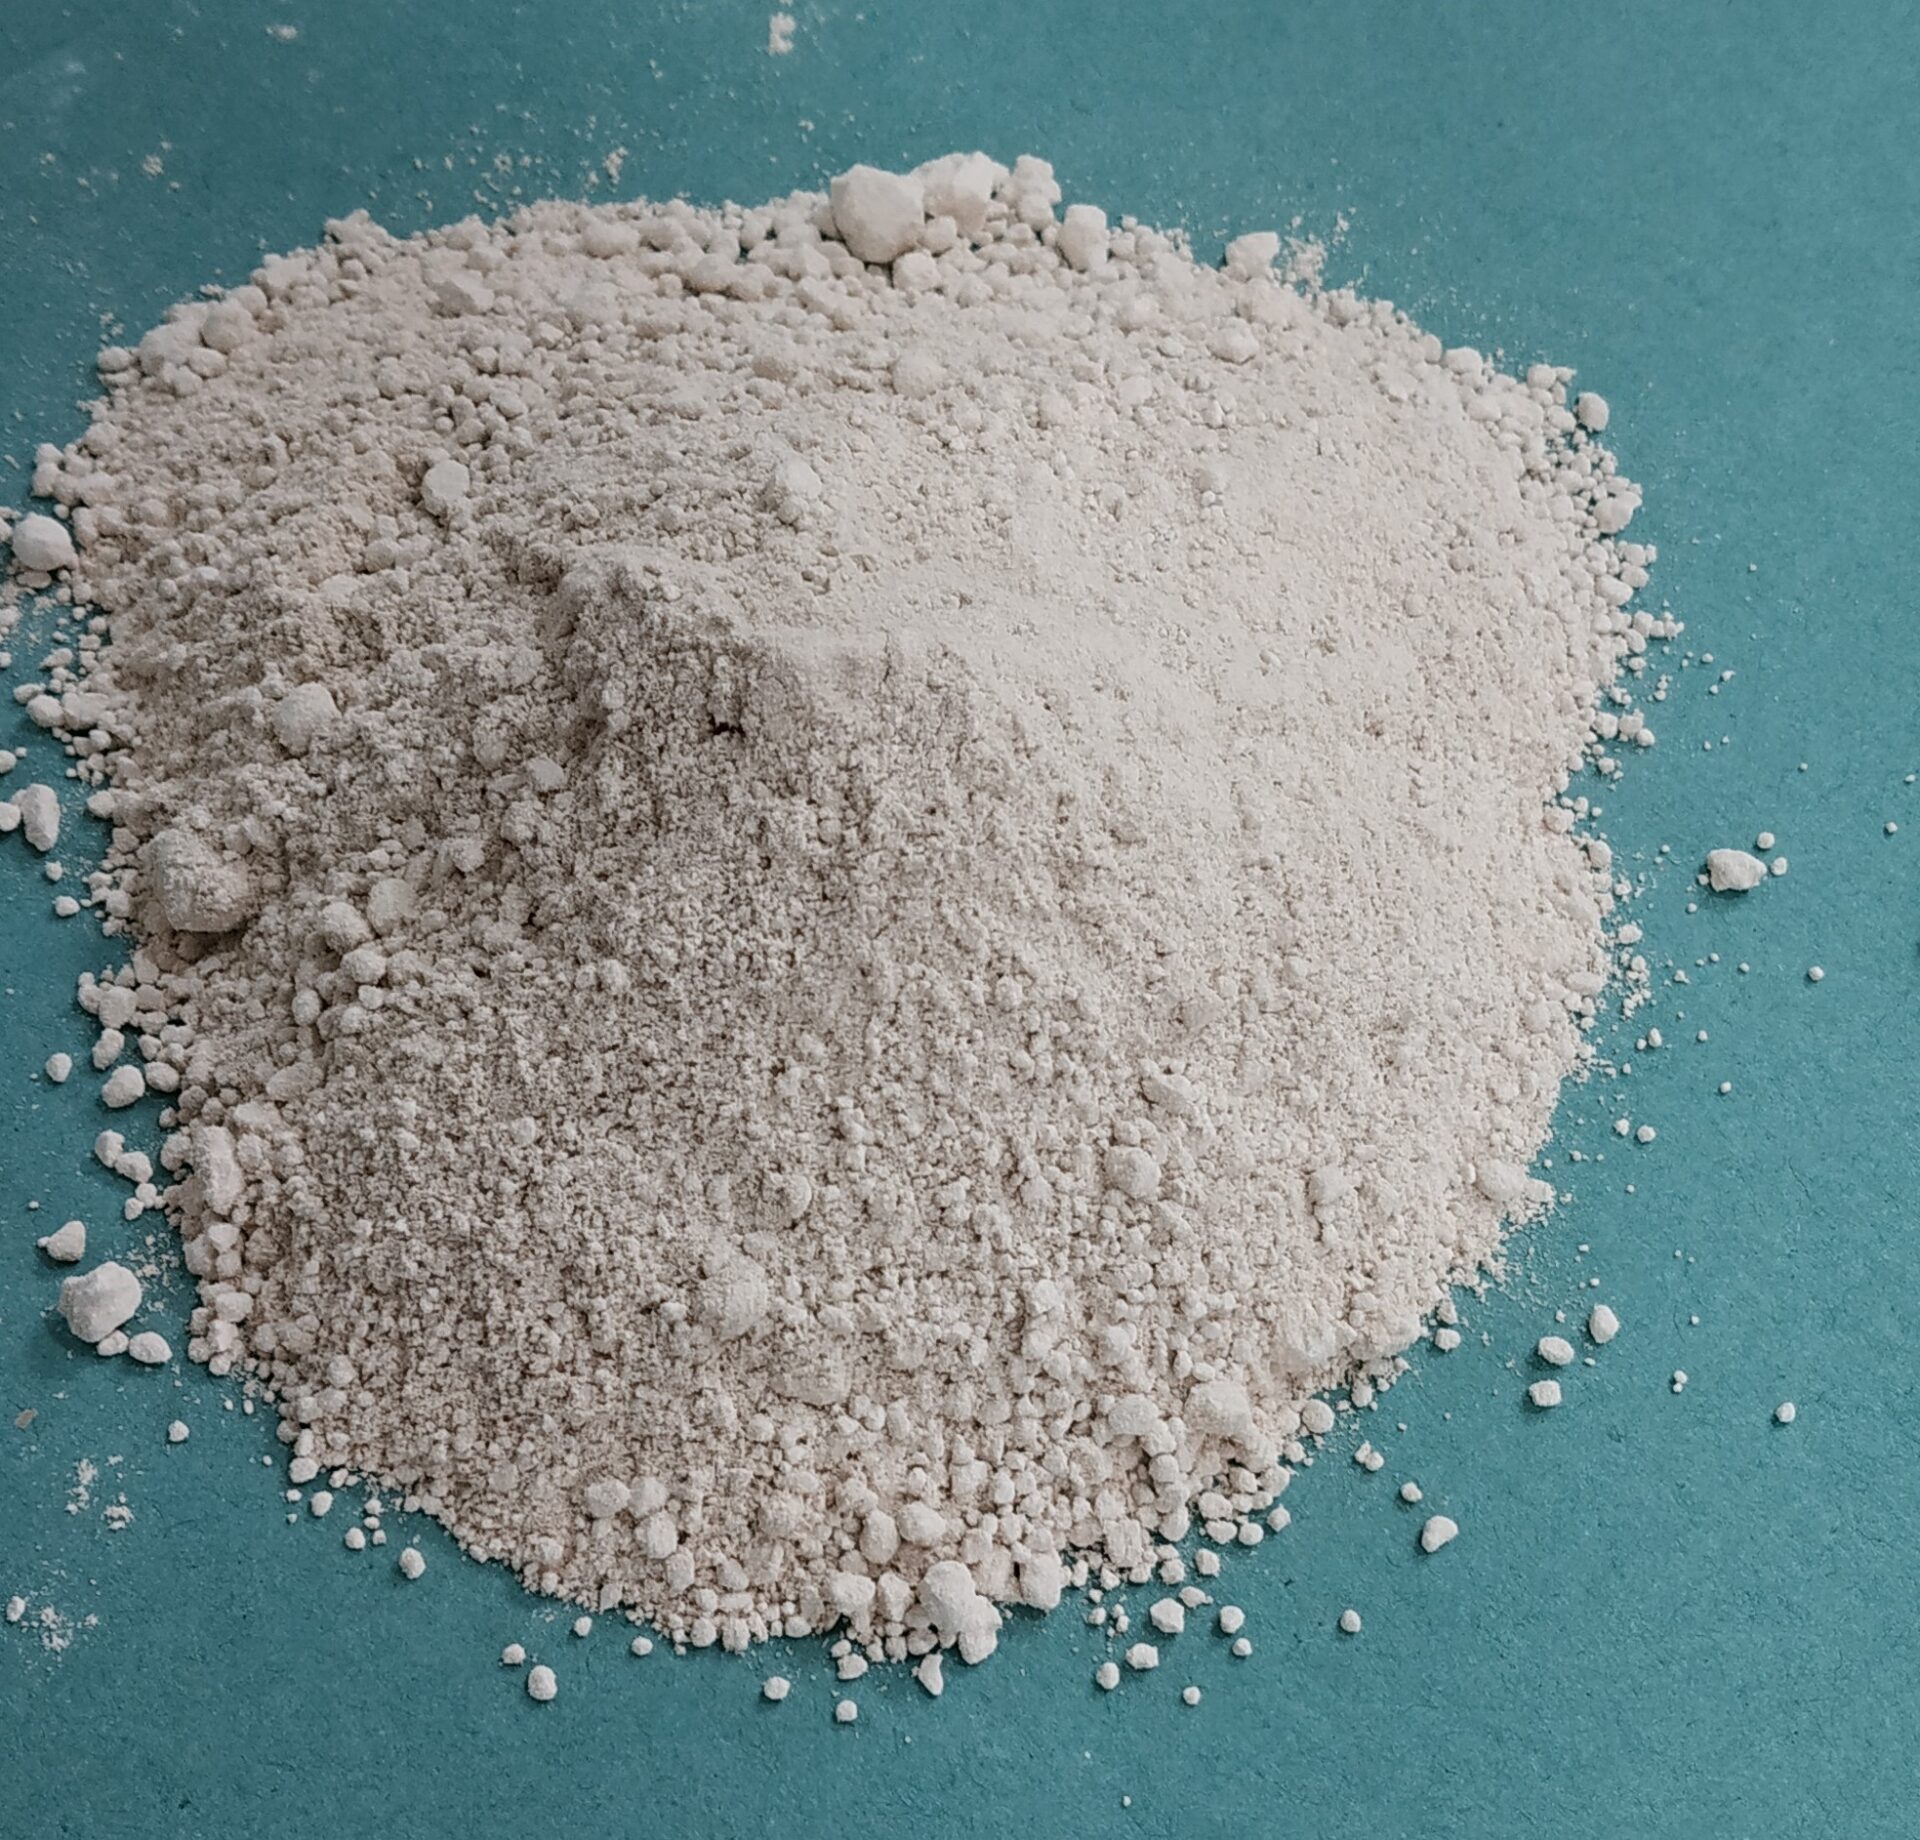 Magnesium Oxide Substrates Market